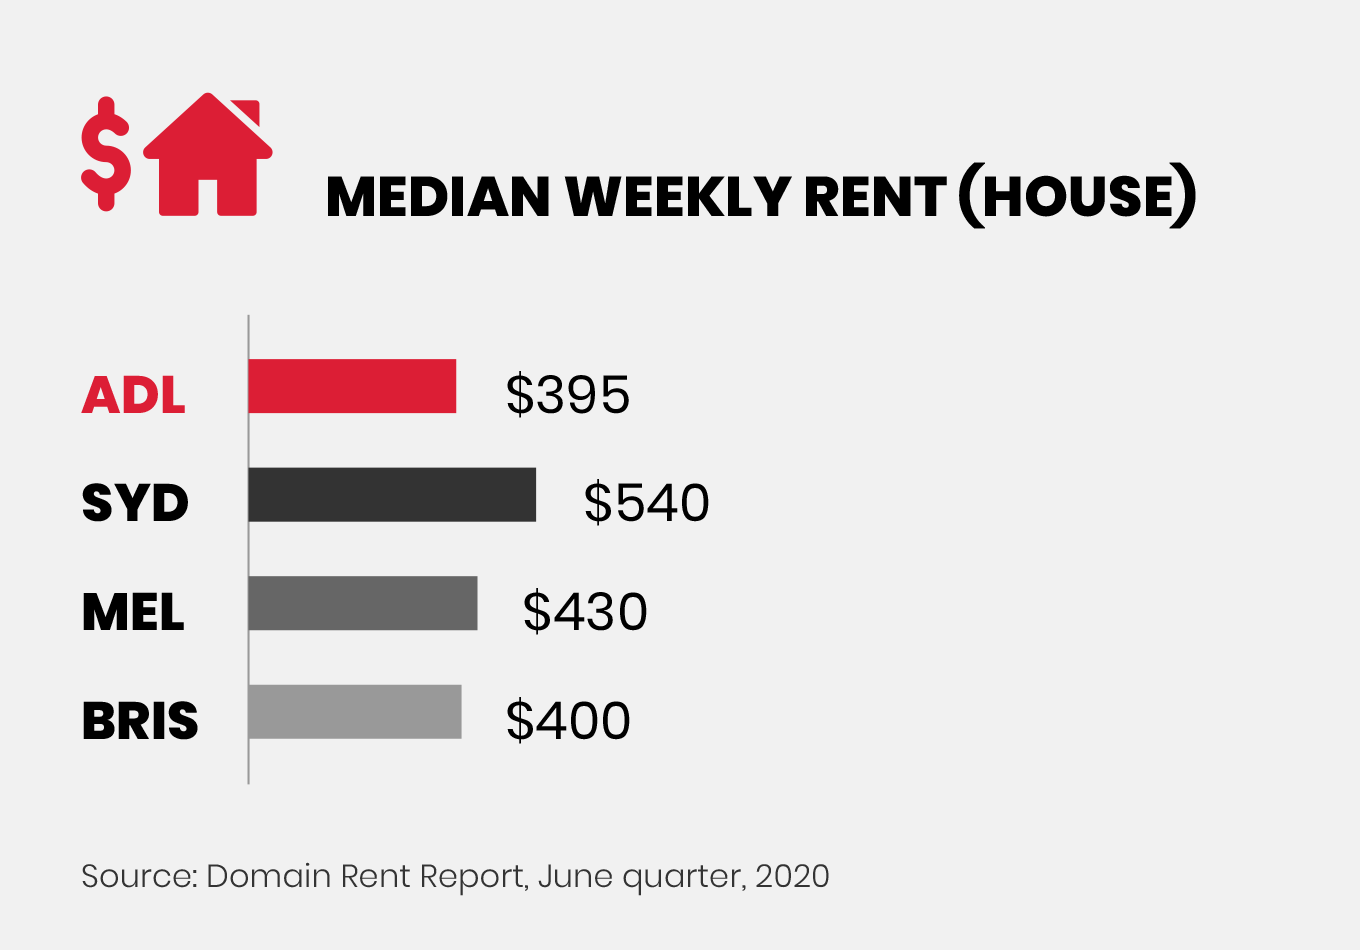 Adelaide Median Weekly Rent Comparison